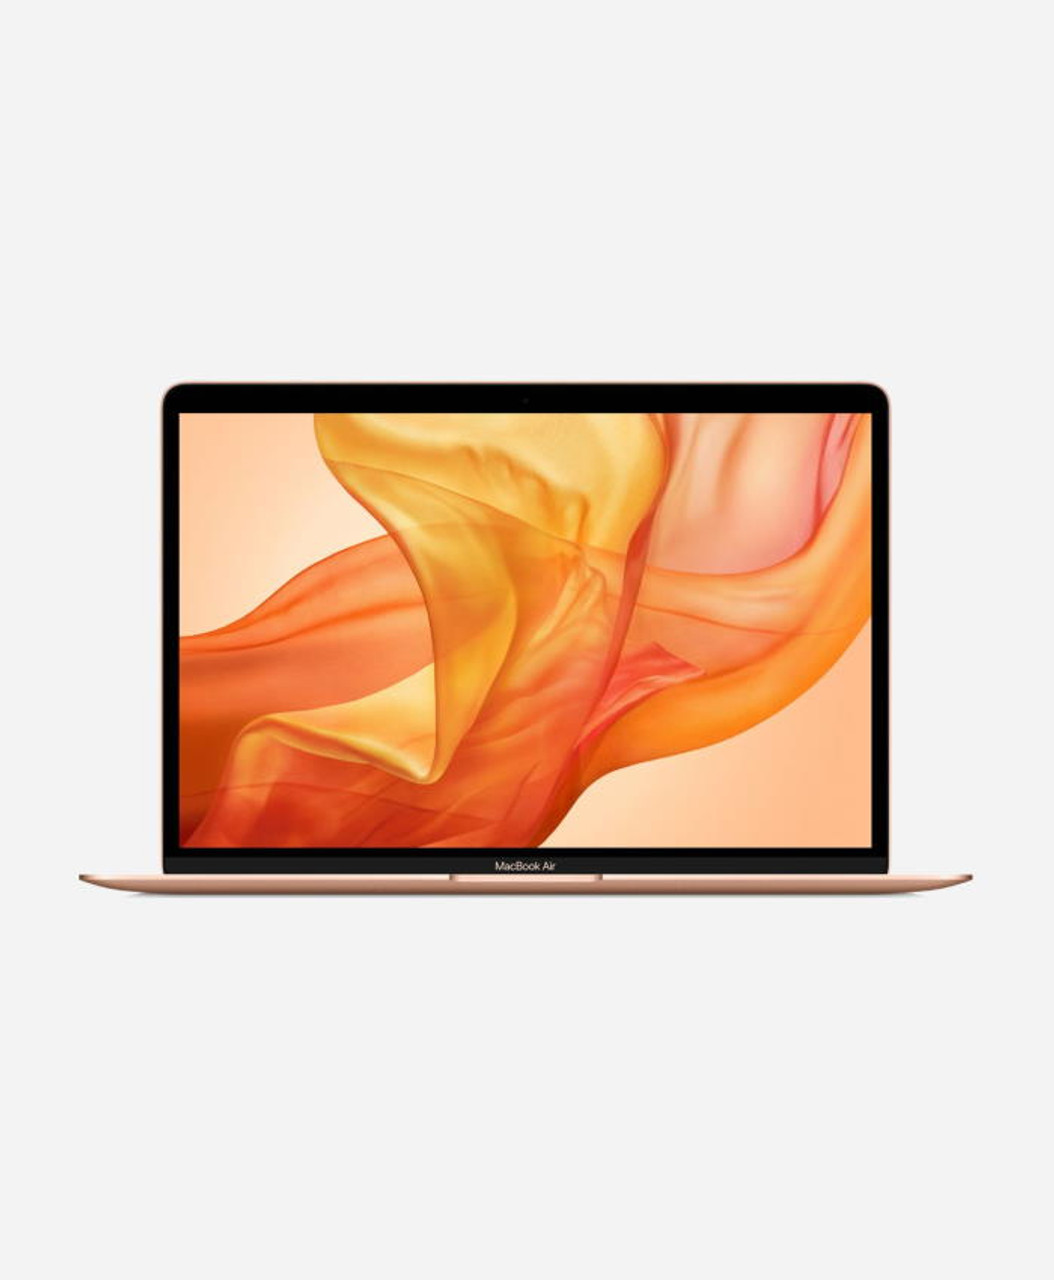 Used Apple Macbook Air 13.3-inch (Retina, Gold) 1.6GHZ Dual Core ...